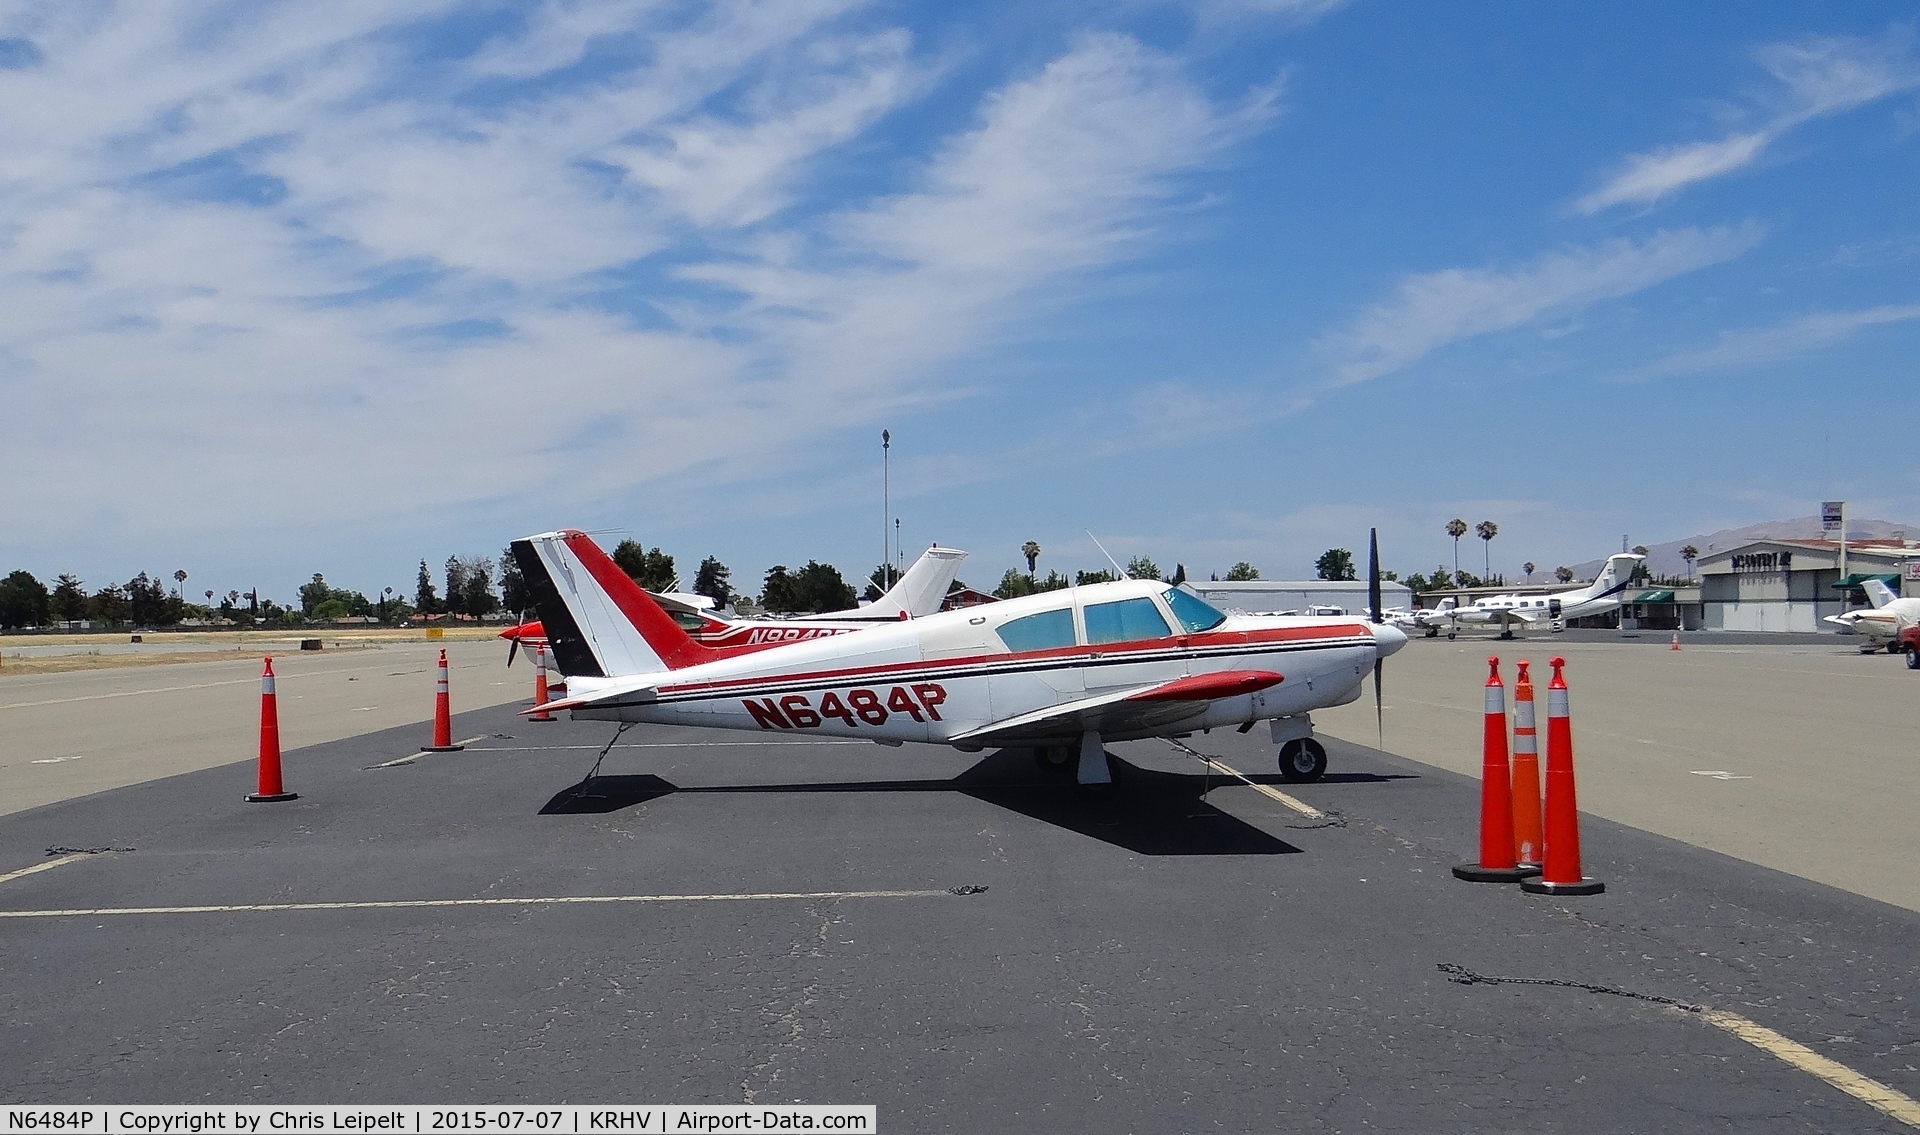 N6484P, 1959 Piper PA-24-250 Comanche C/N 24-1602, A transient 1959 Piper Comanche (RIVERSIDE, CA) located at transient parking visiting Reid Hillview Airport, CA.